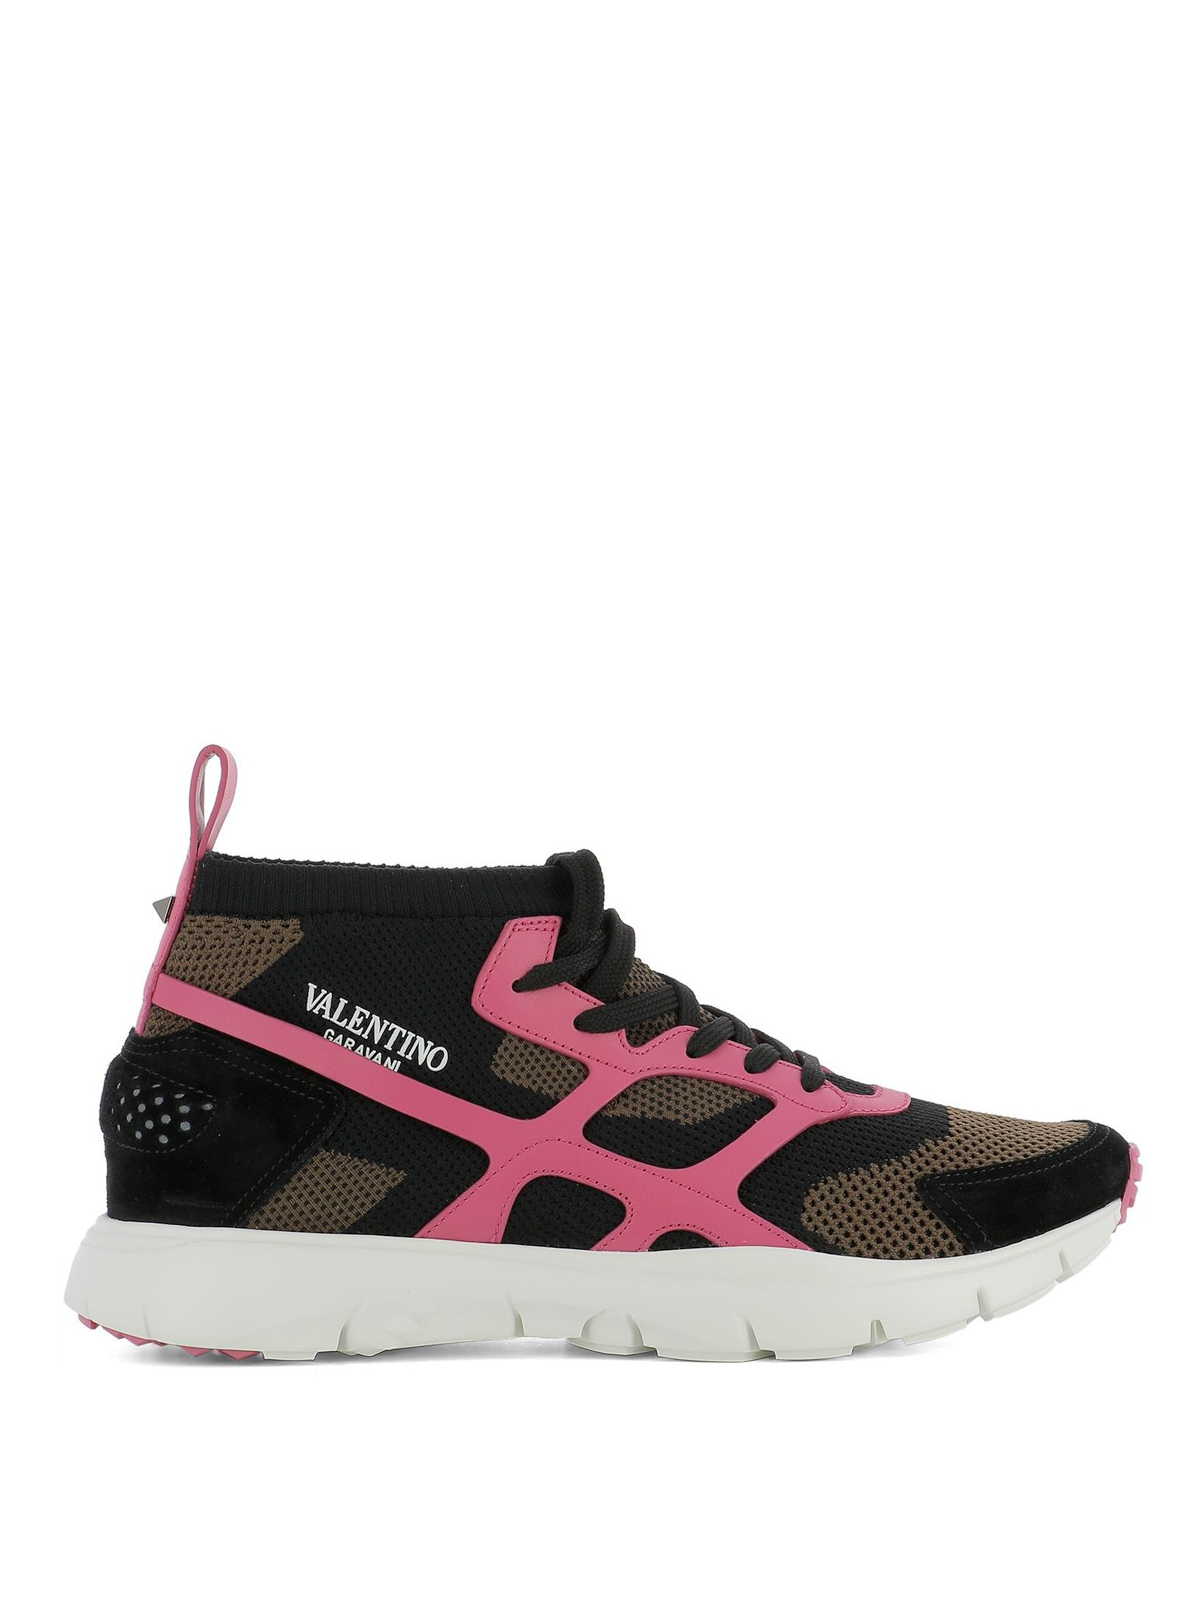 mens pink valentino trainers